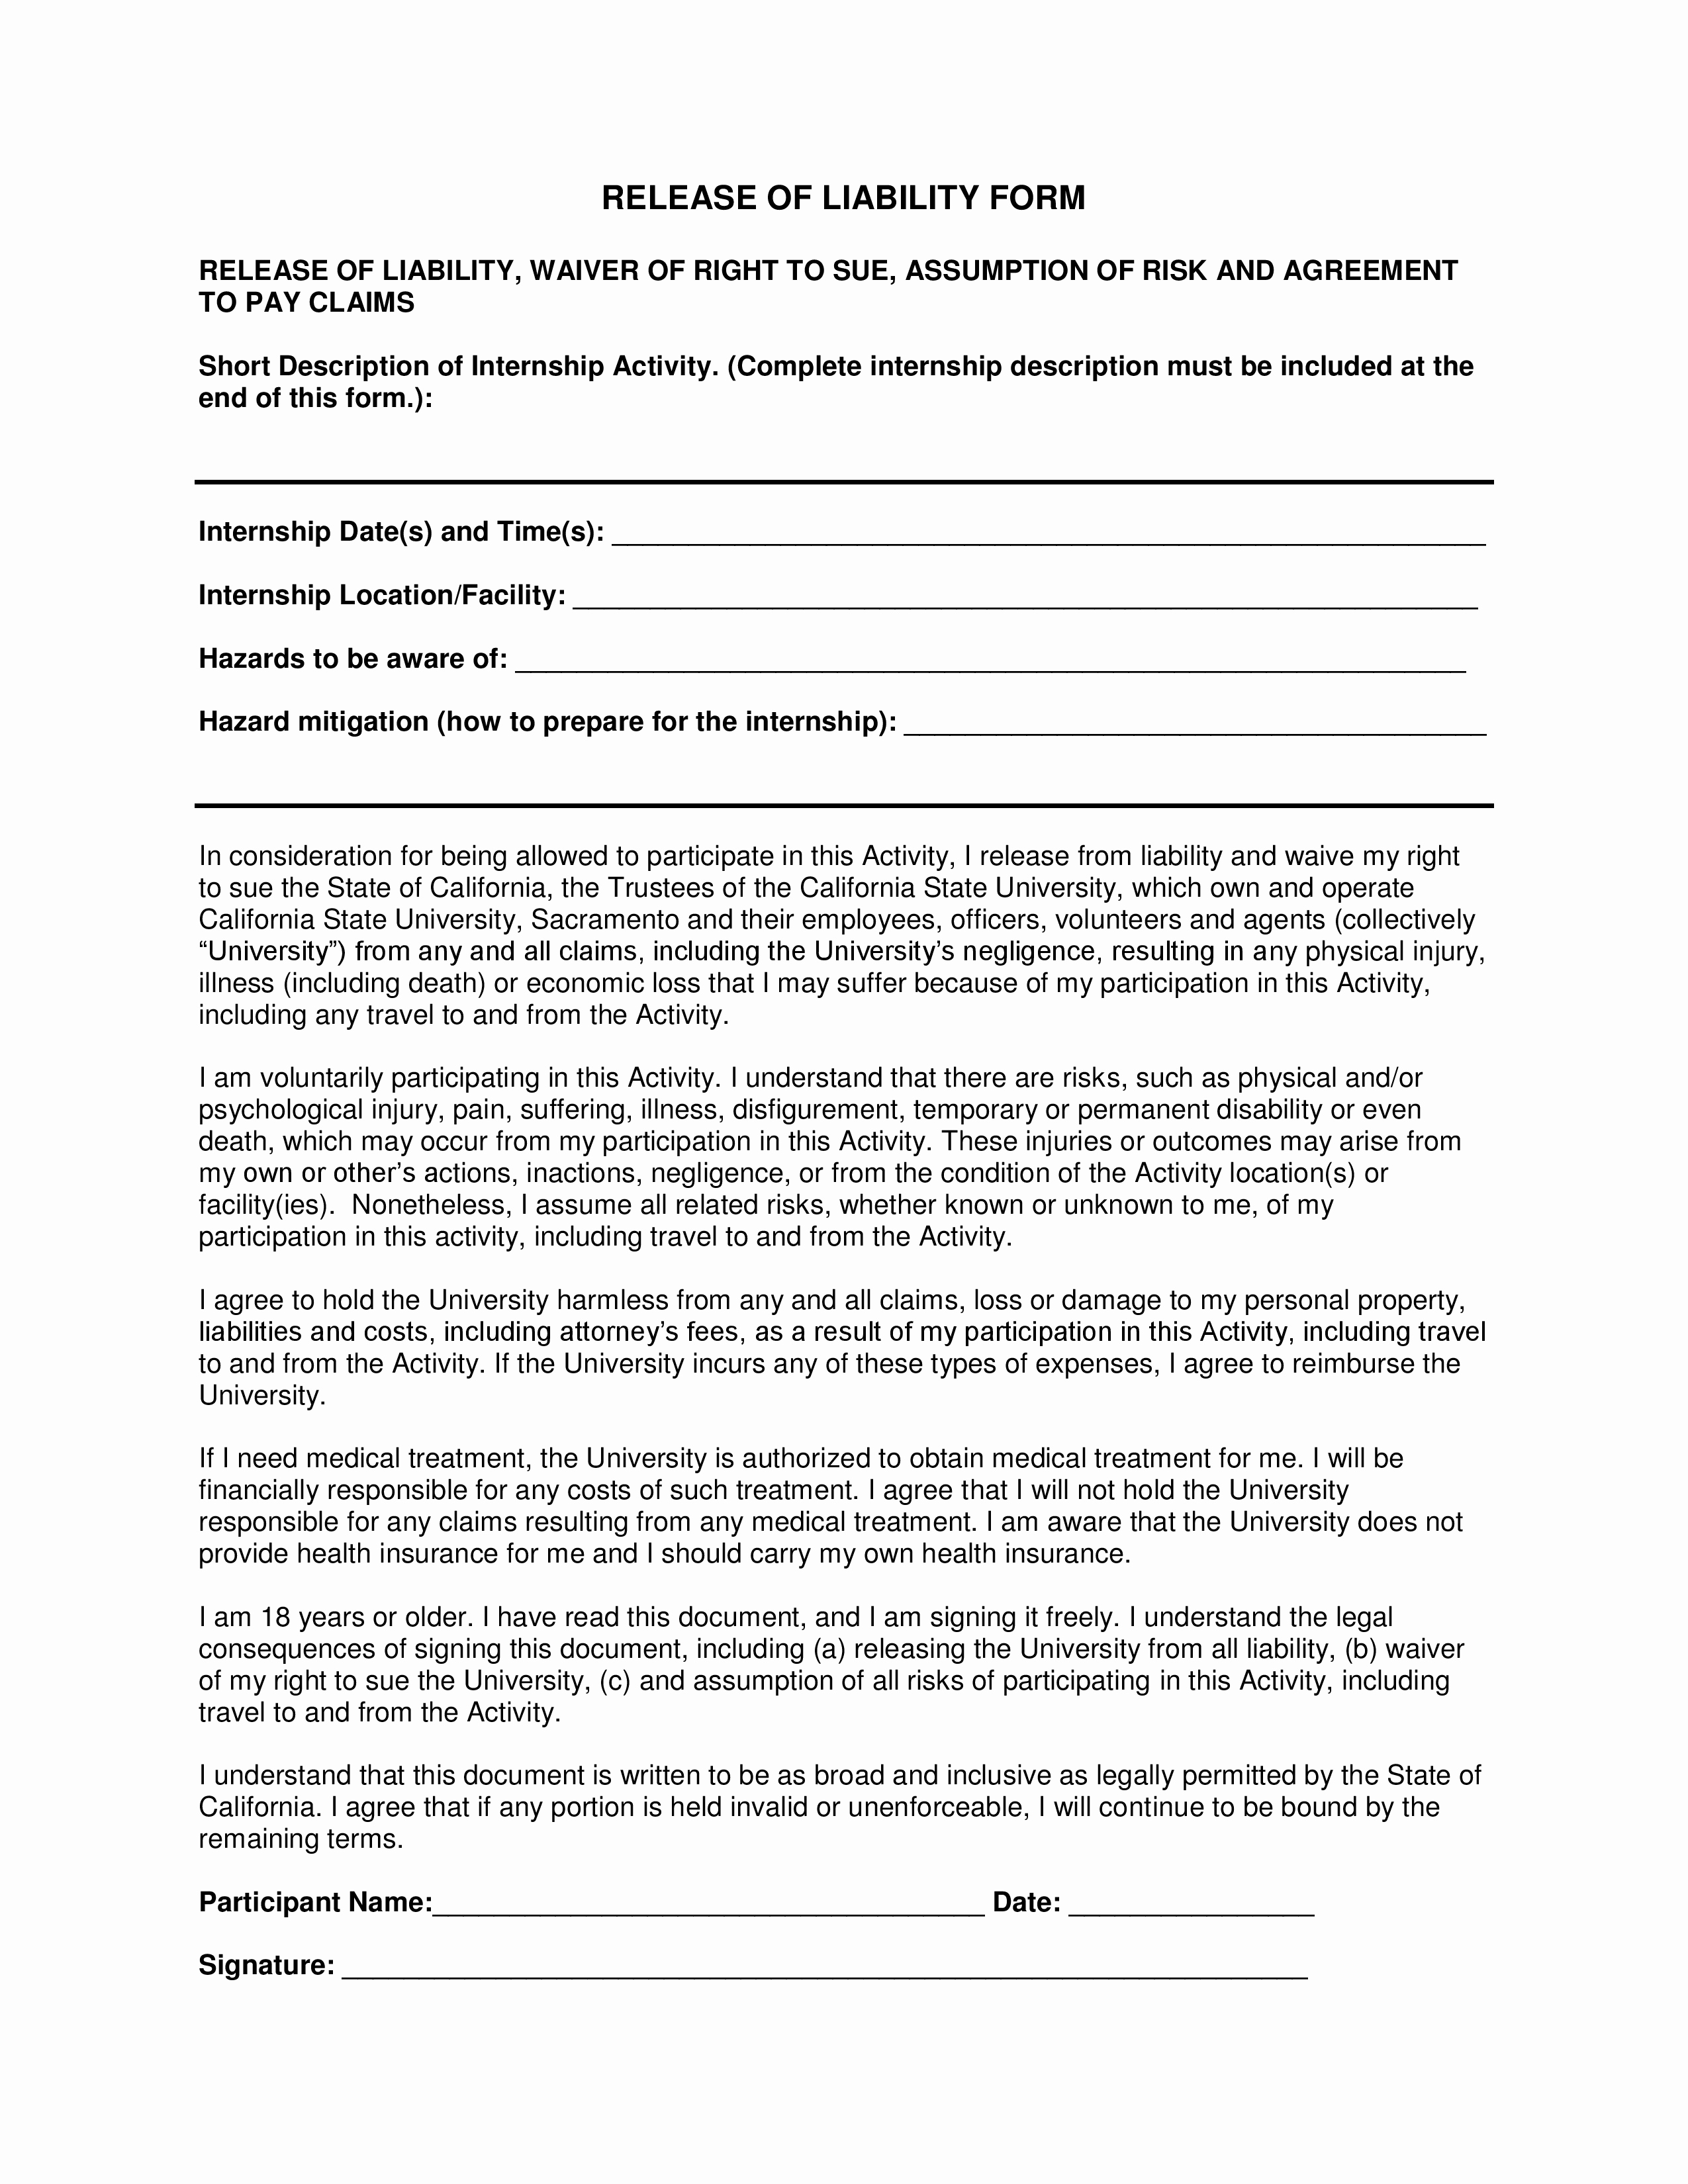 Release Of Liability form Pdf Luxury Free Liability Release forms Pdf Template